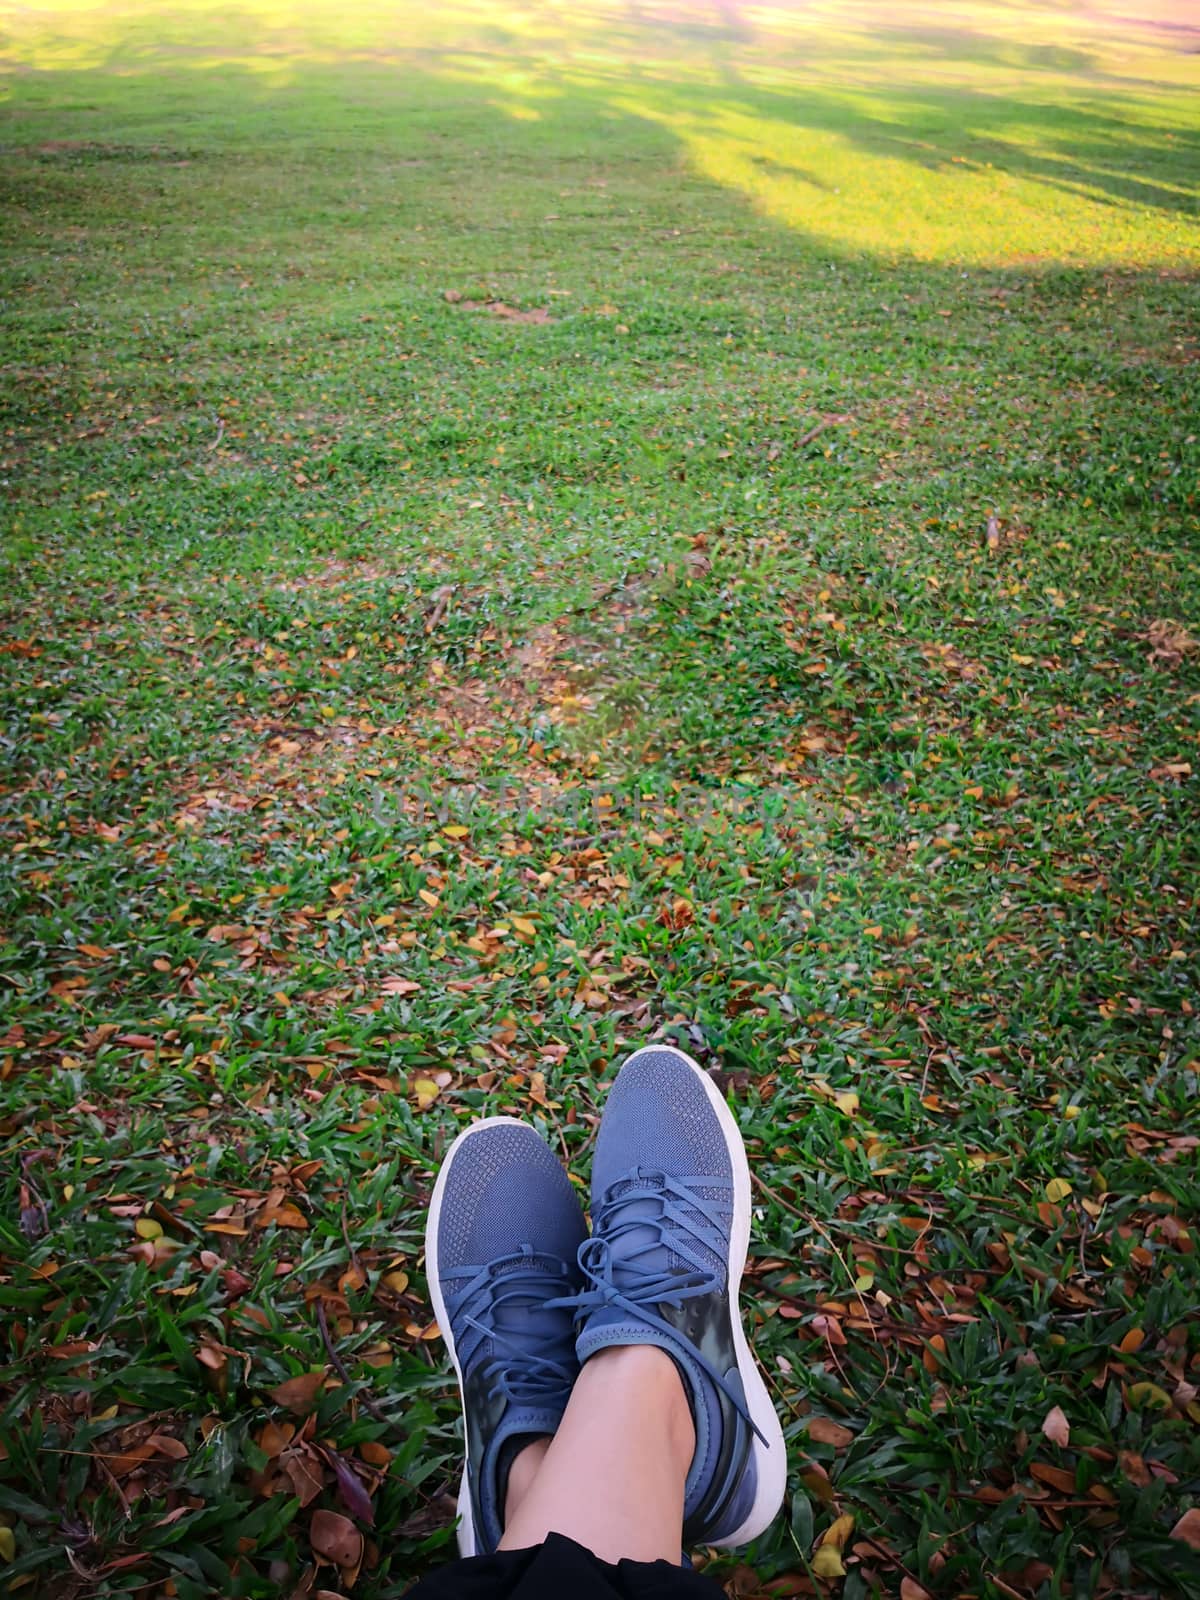 Woman's legs in grey shoes sit on dry leaves in the park.